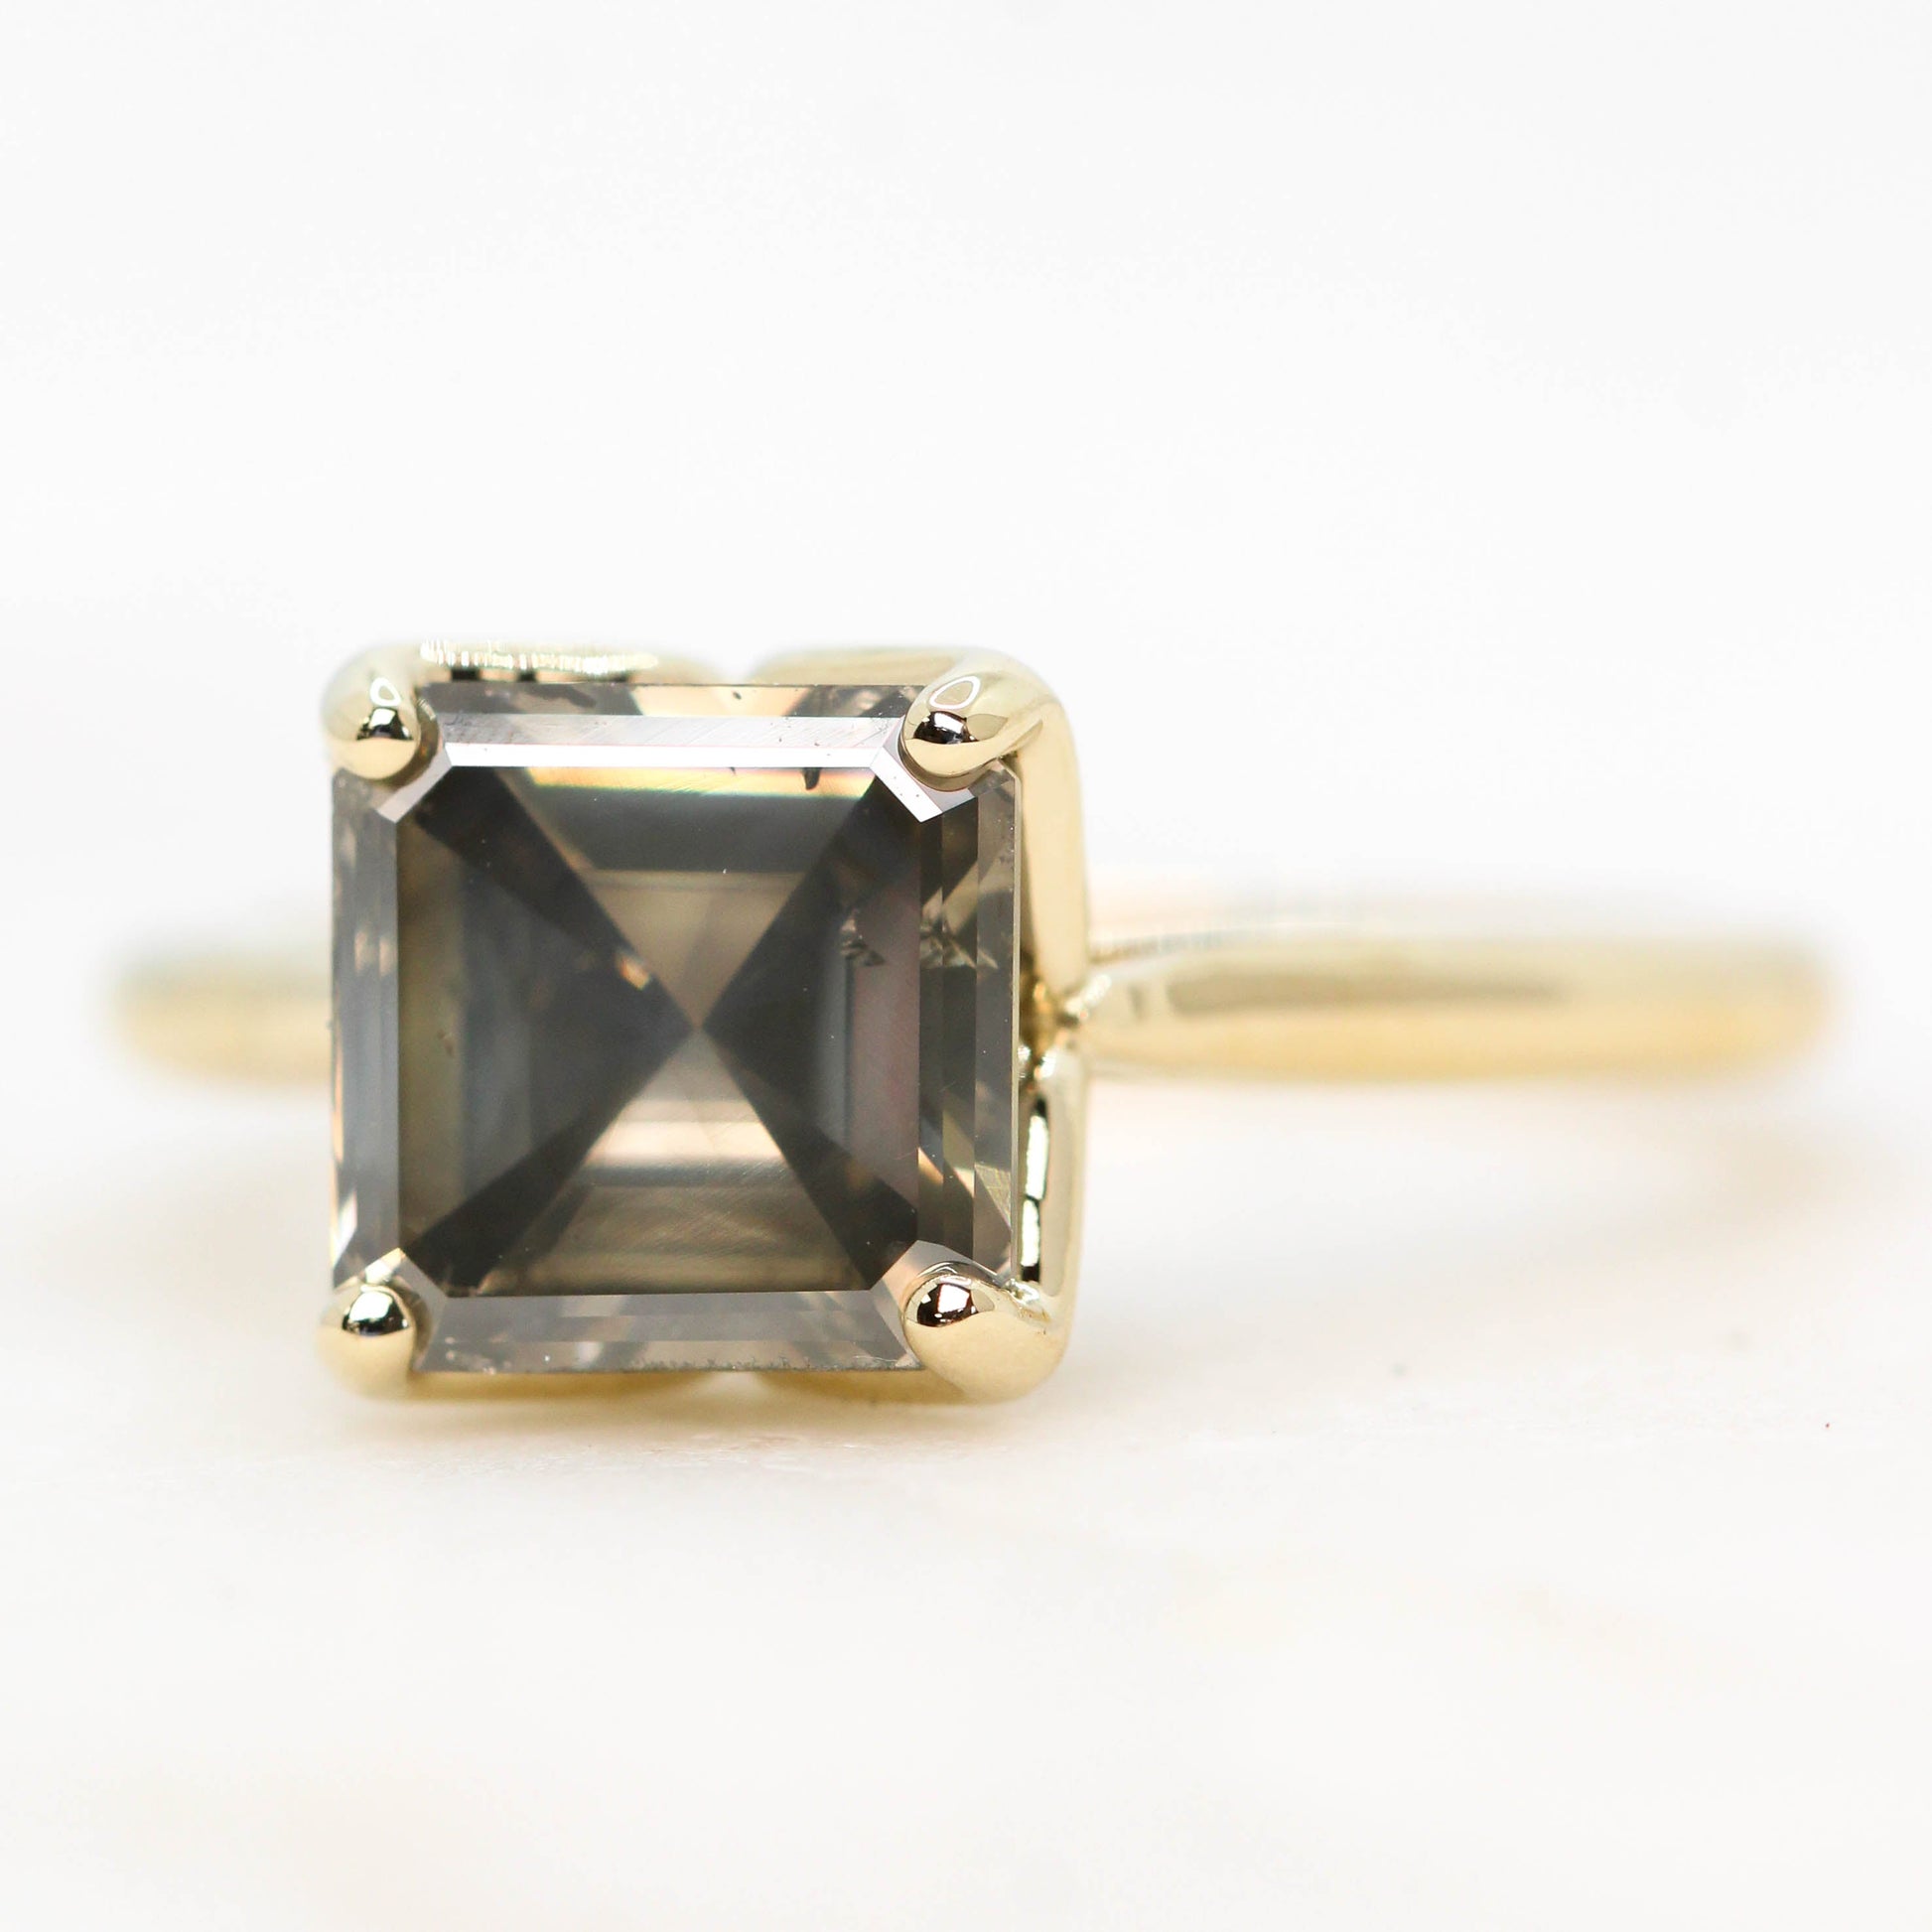 Petal Ring with a 2.64 Carat Asscher Cut Champagne Diamond in 14k Yellow Gold - Ready to Size and Ship - Midwinter Co. Alternative Bridal Rings and Modern Fine Jewelry